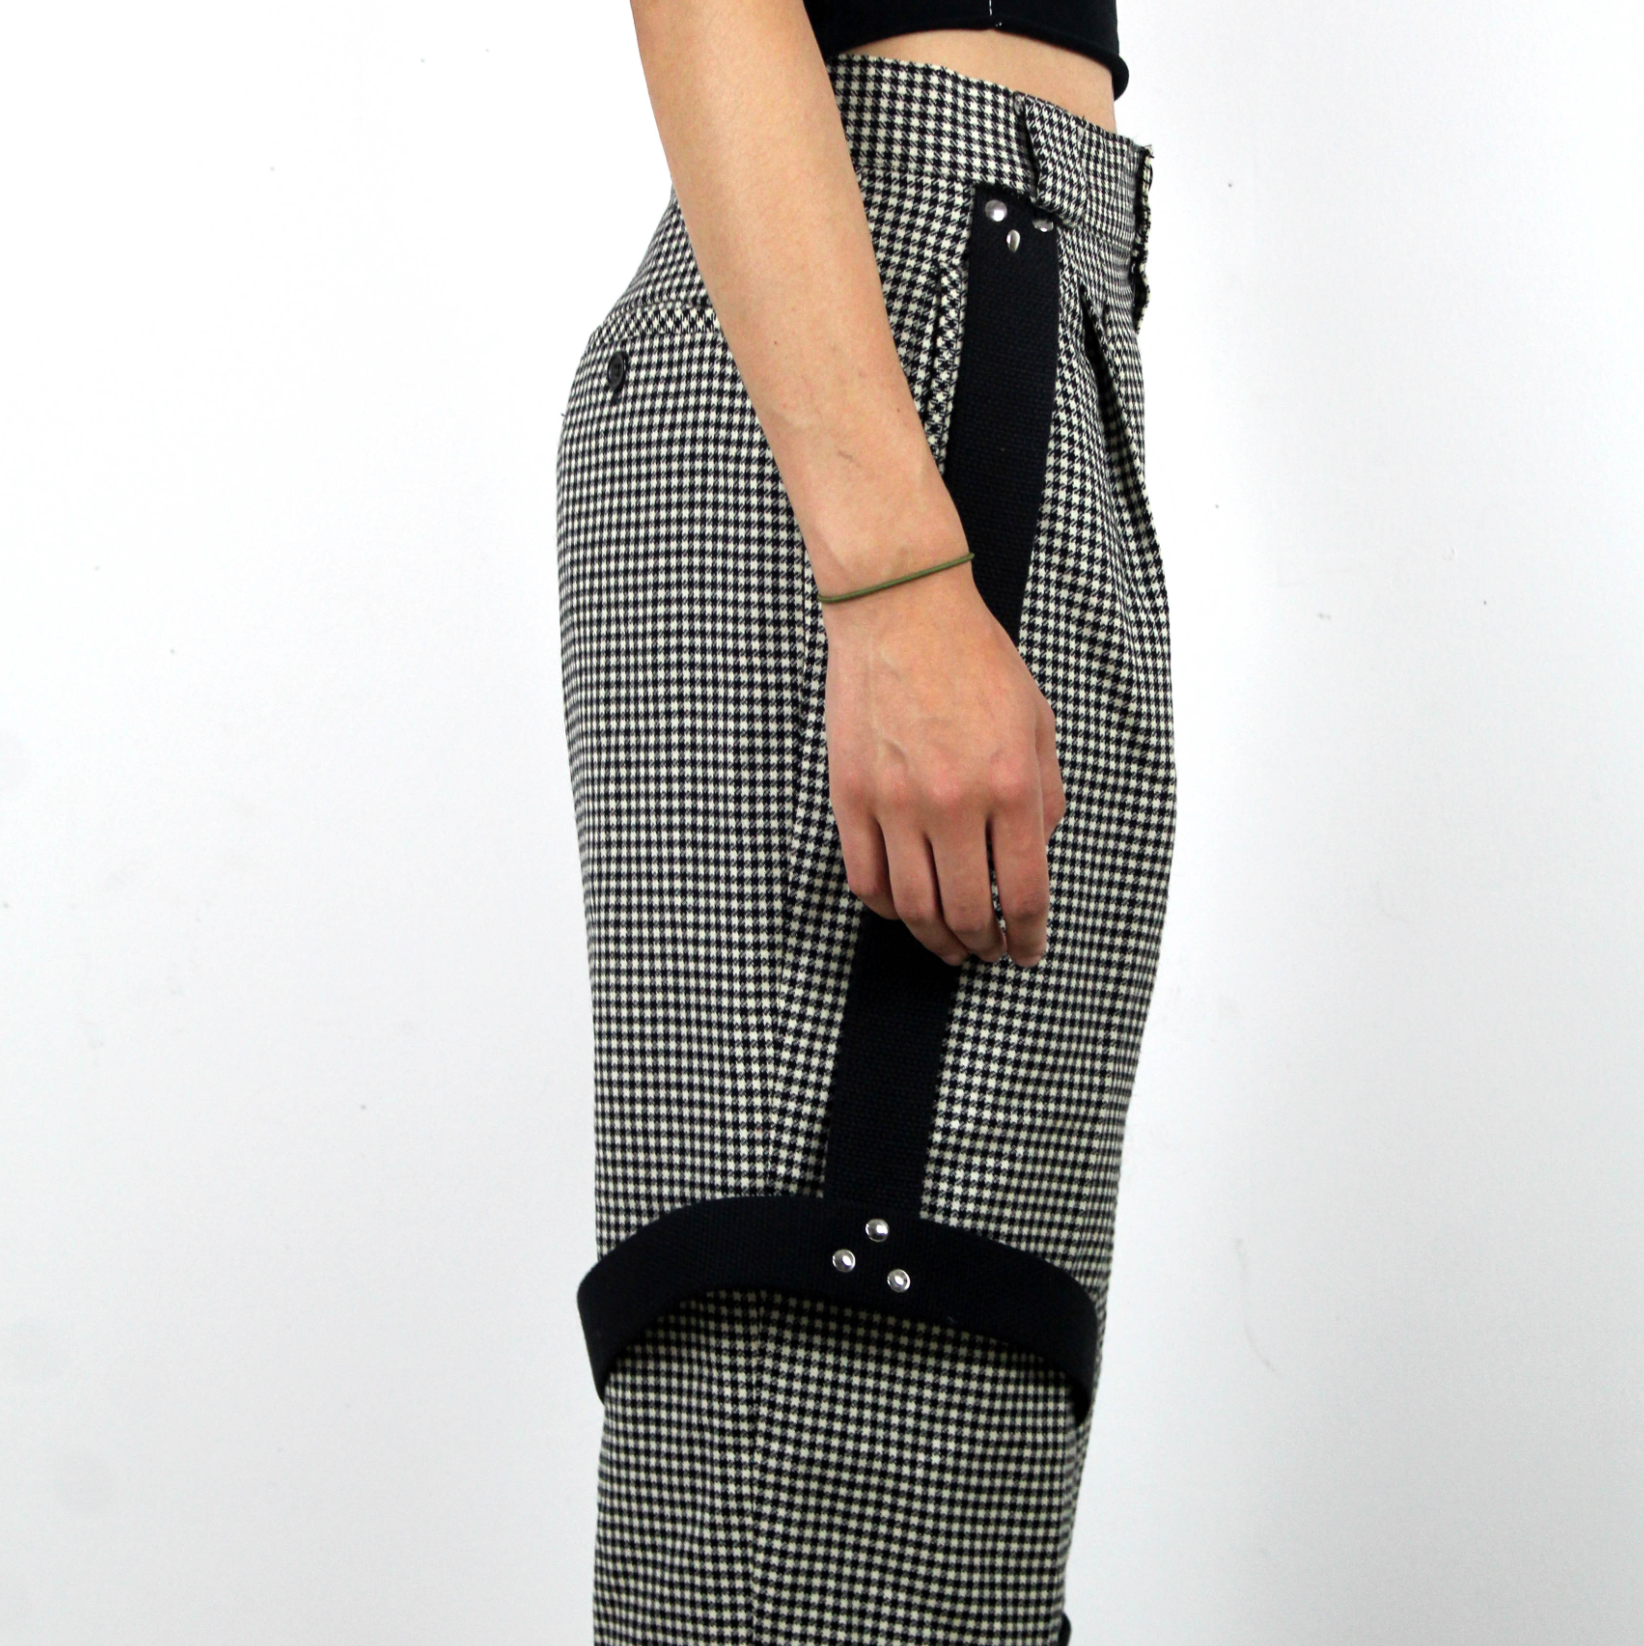 Houndstooth Pant